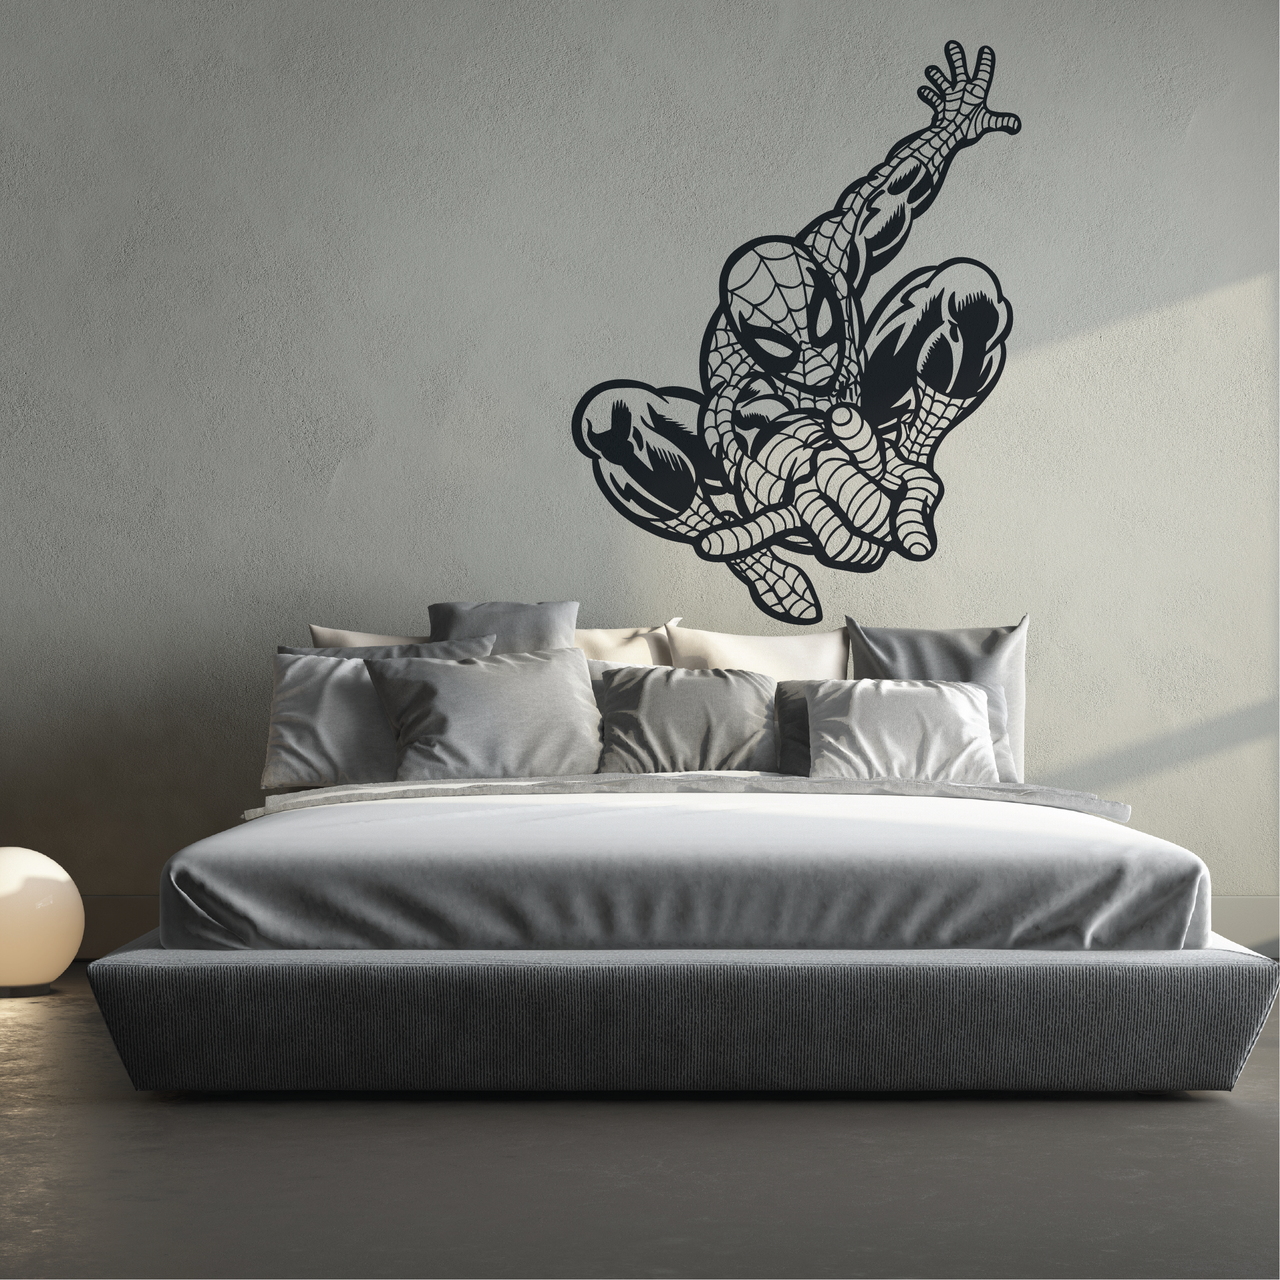 Spiderman Wall Decal